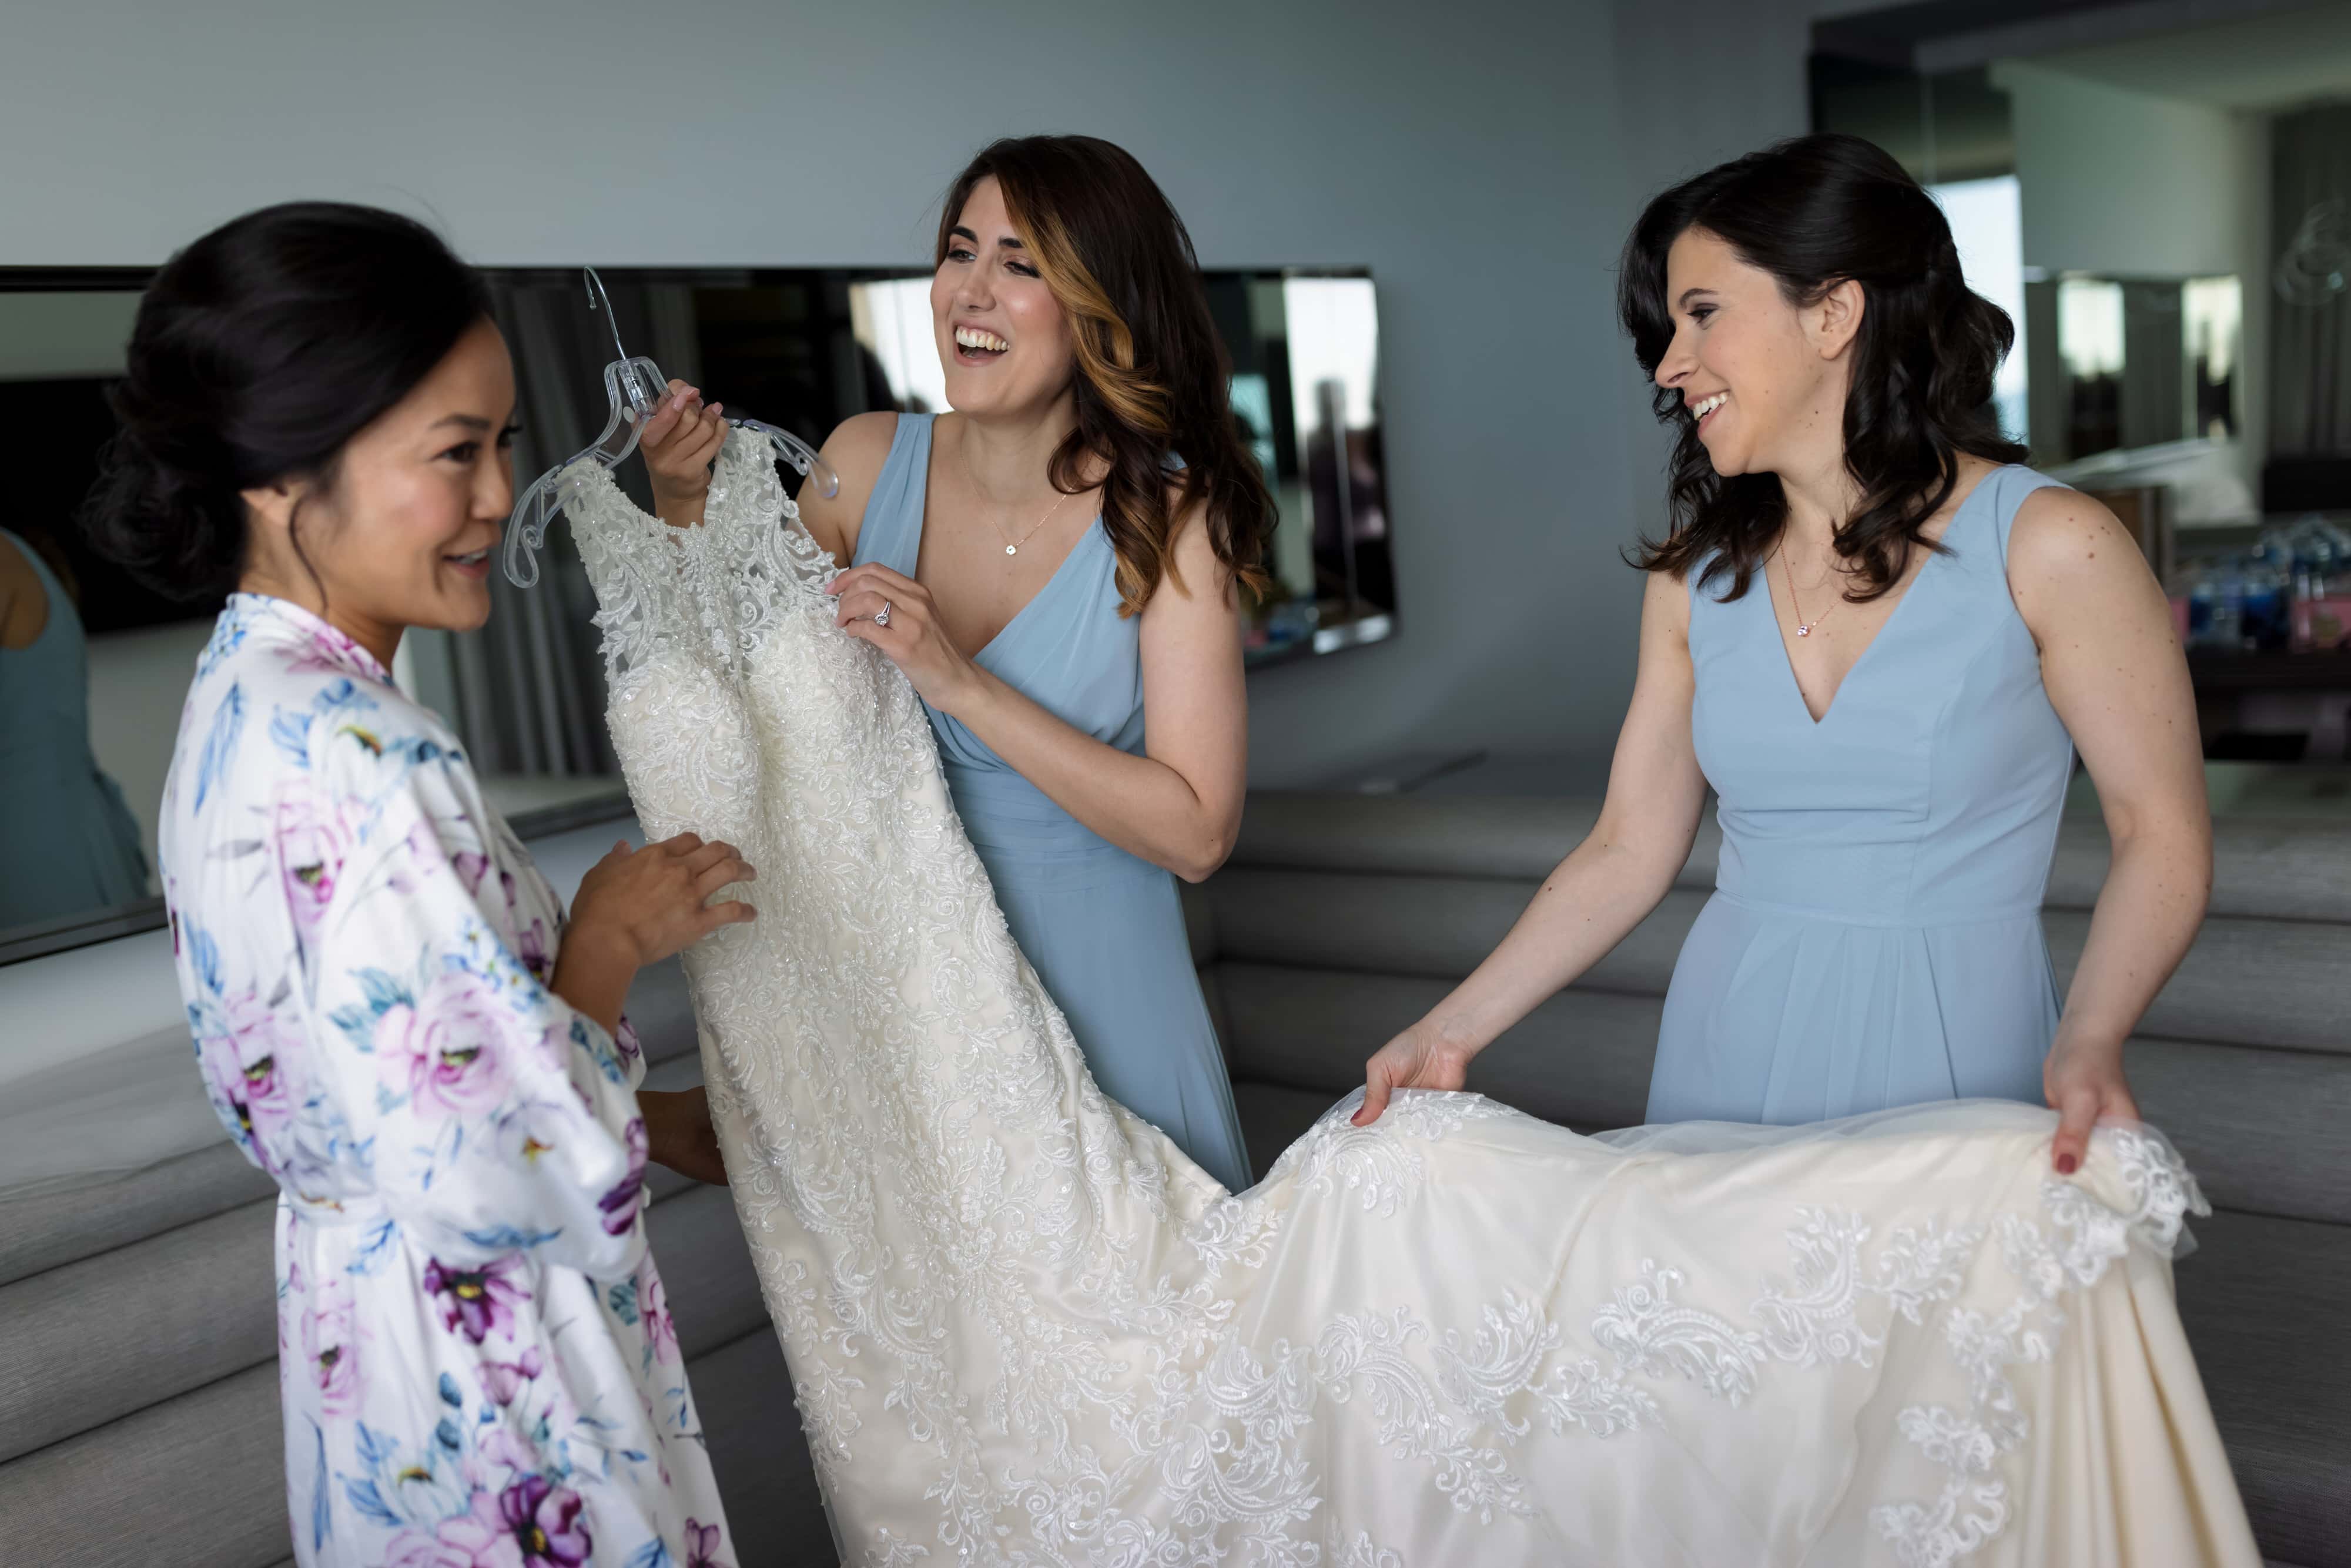 Bride and bridesmaids get ready to put on bridal gown